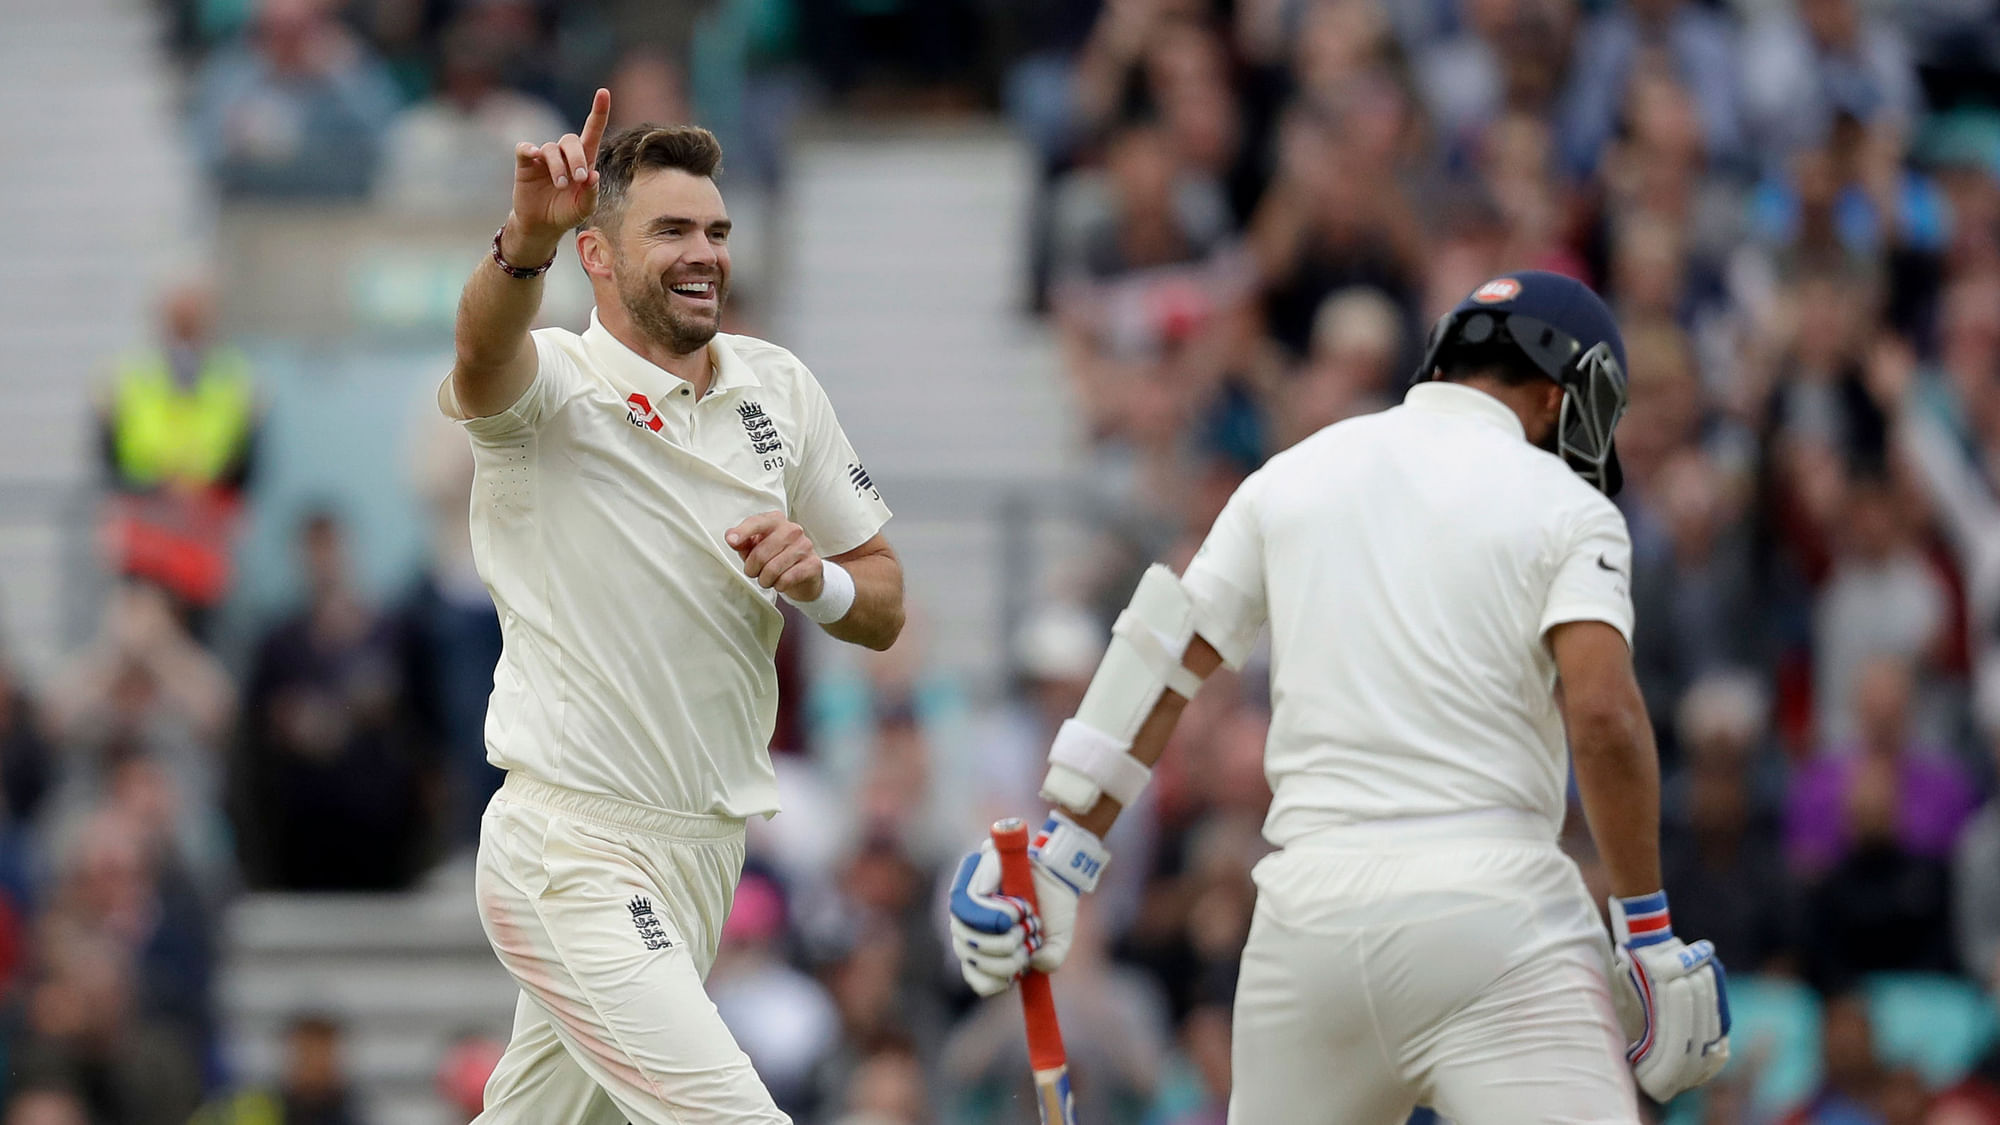 England pacer James Anderson has been fined 15 percent of his match fee for showing dissent at an umpire’s decision